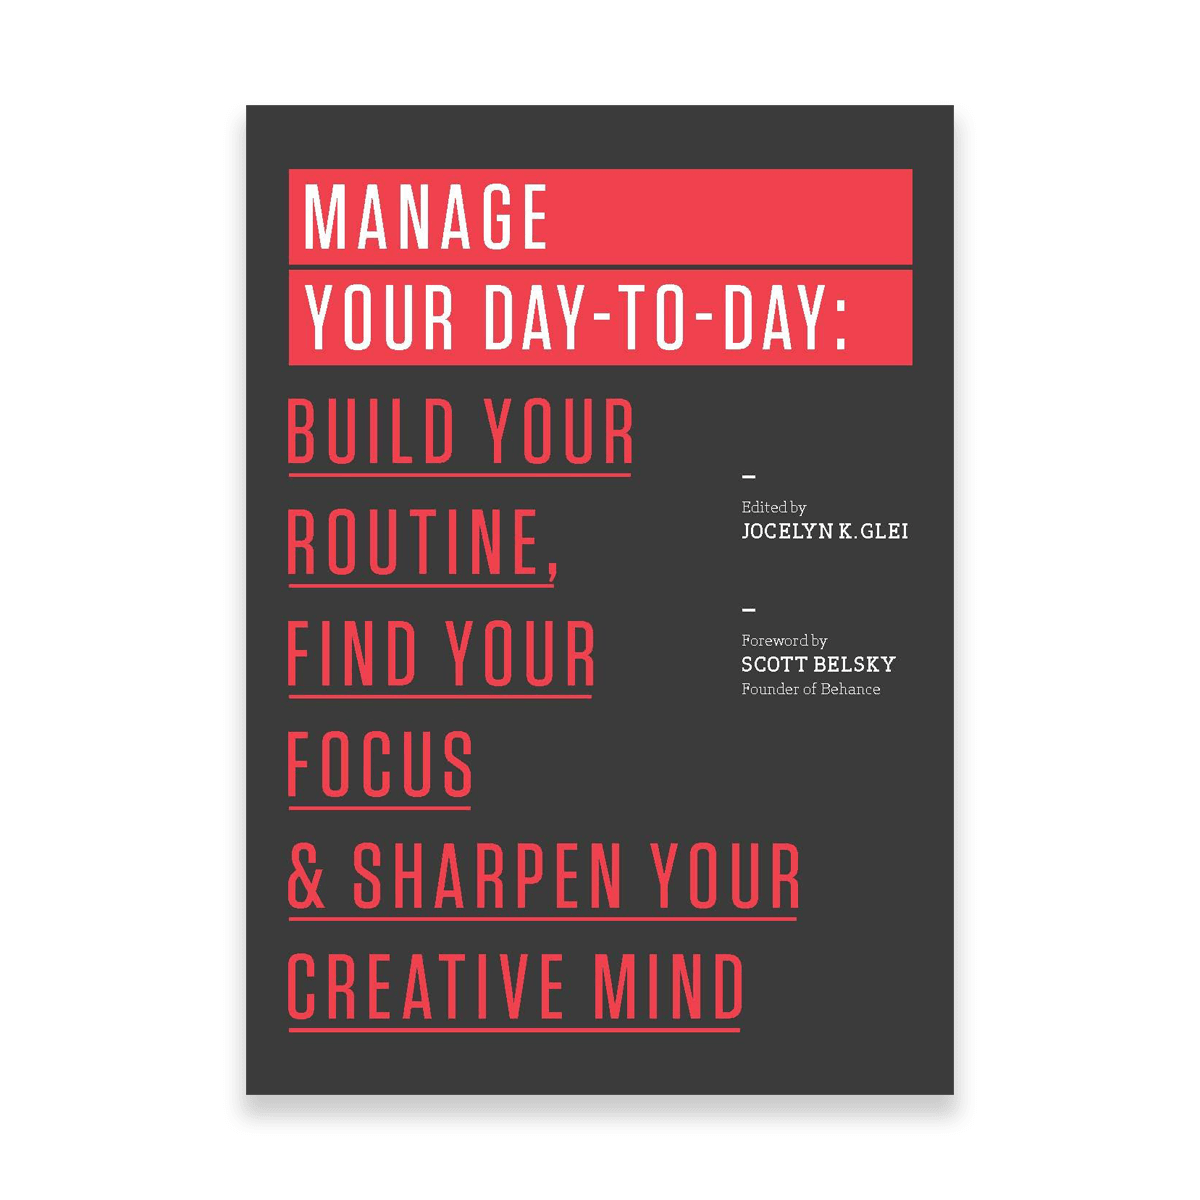 Manage Your Day-to-Day by Jocelyn Glei